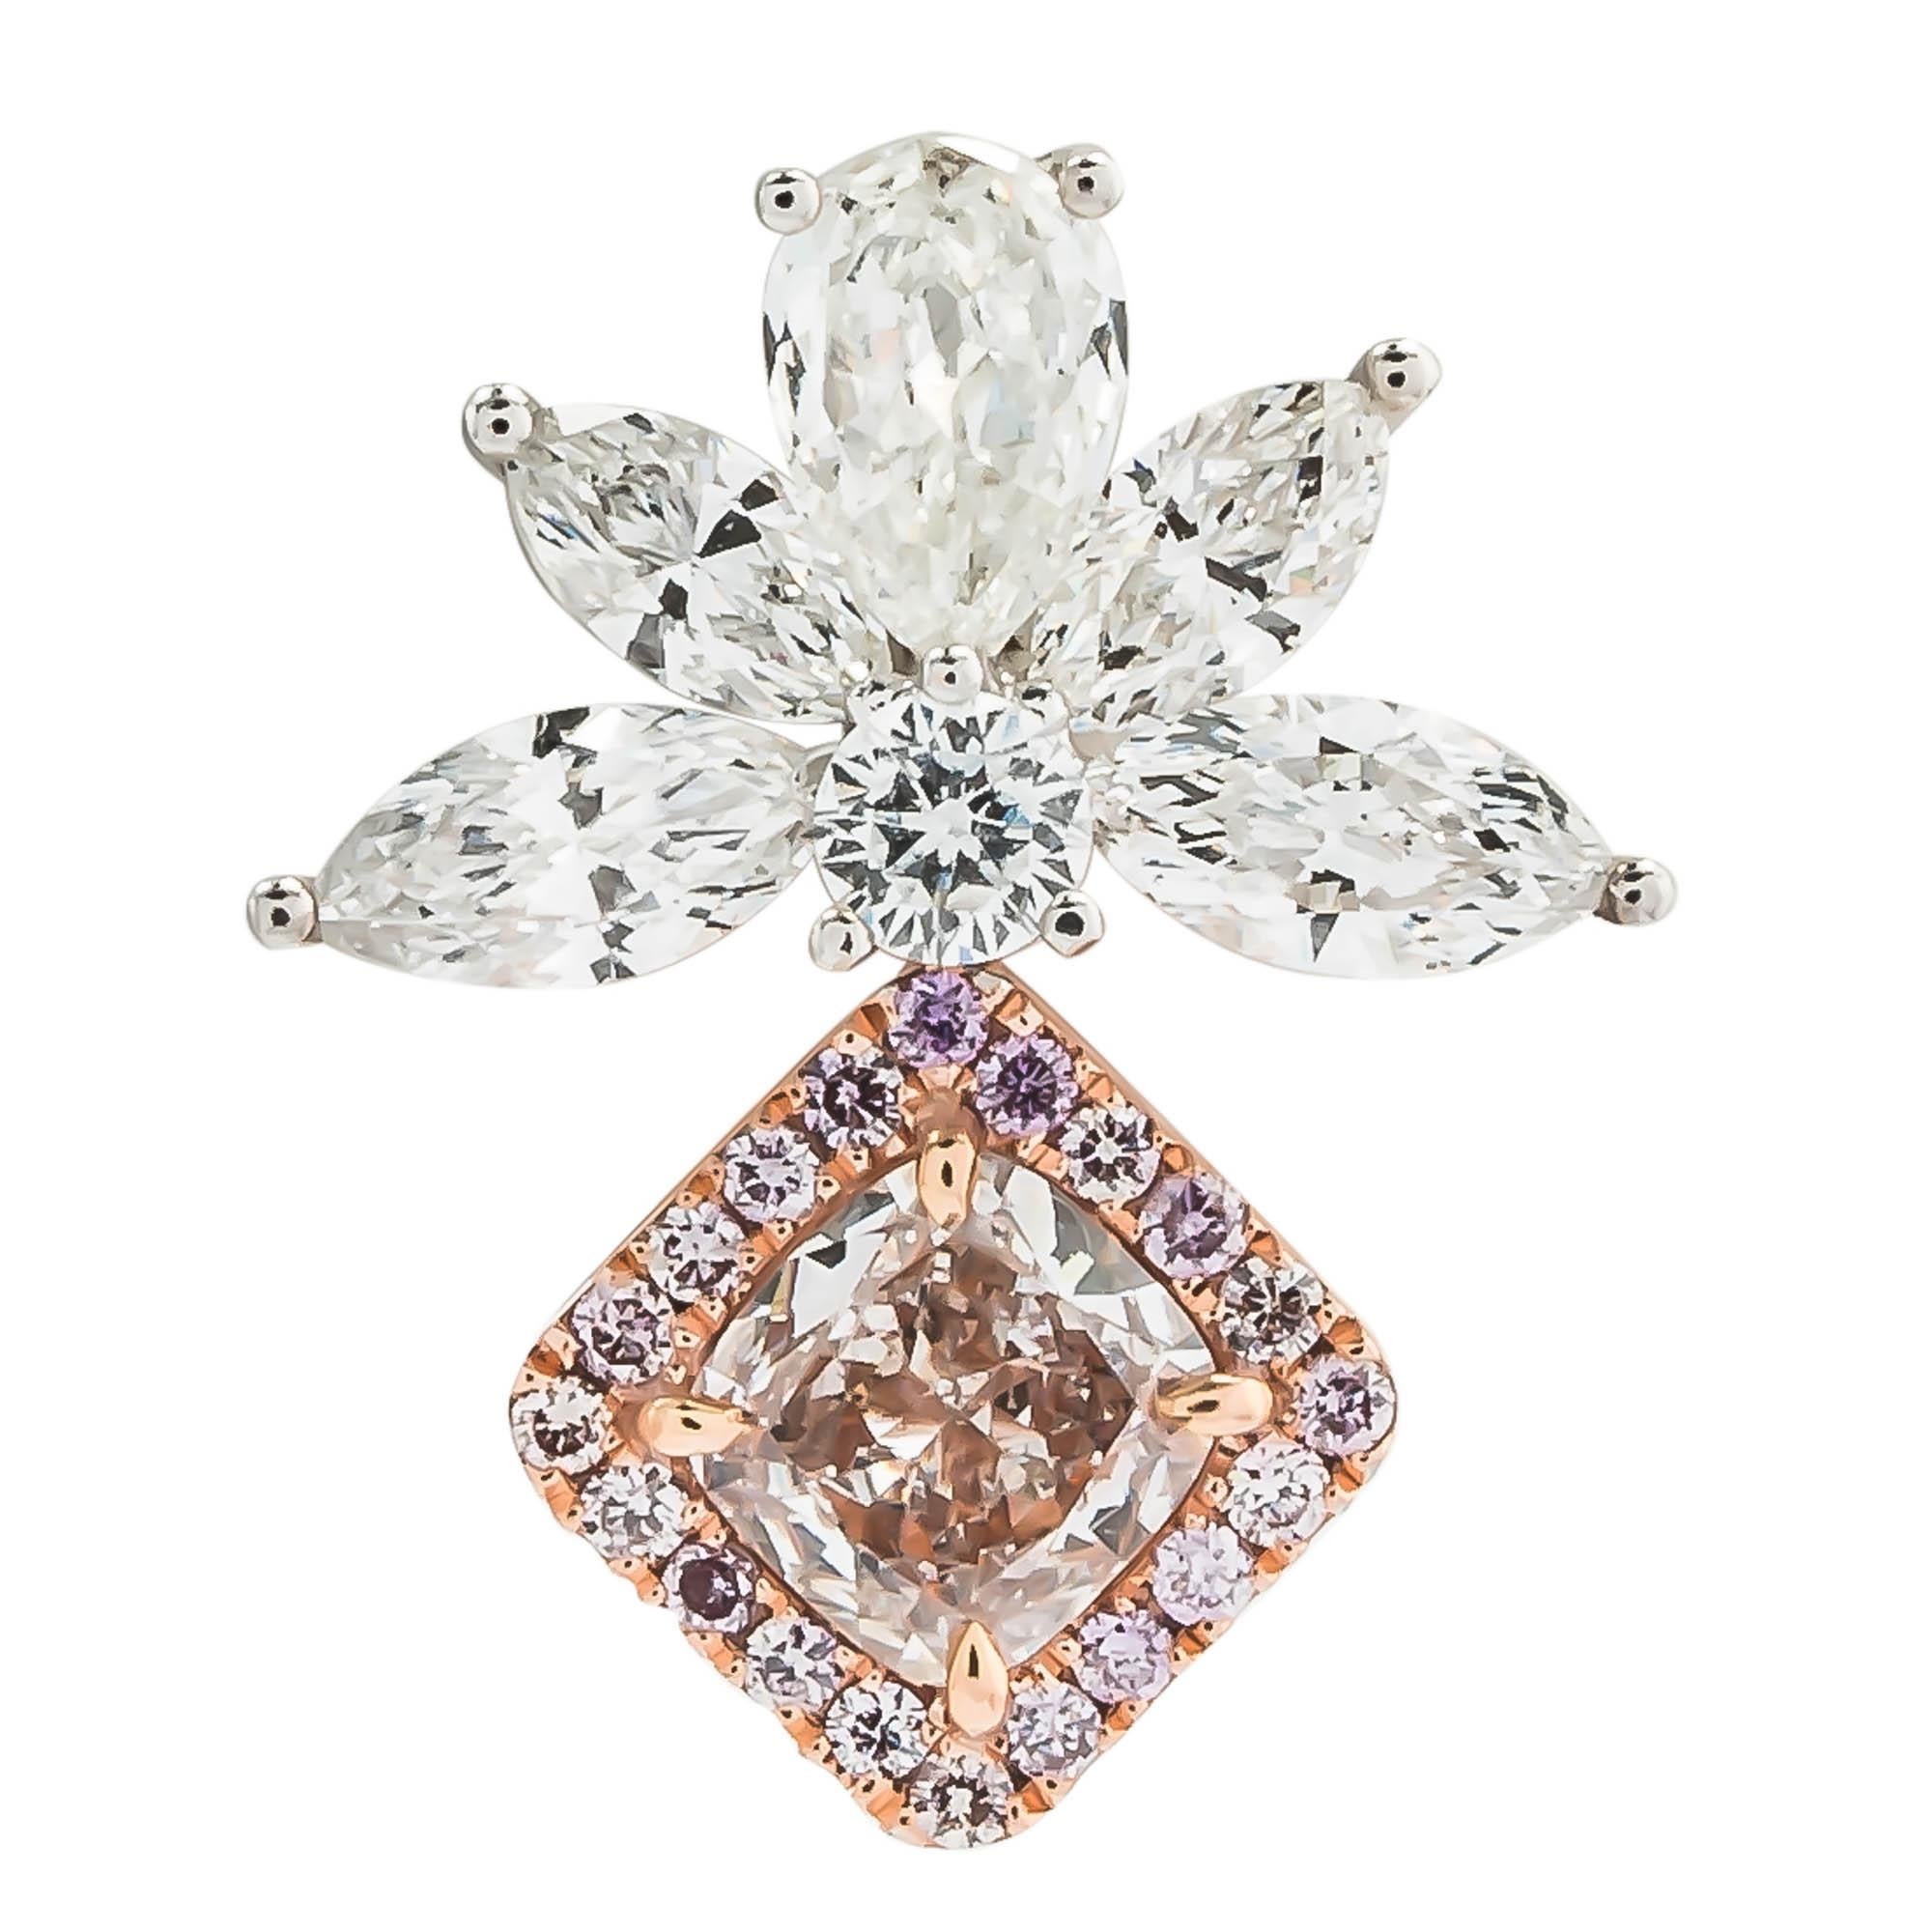 18 karat two tone earrings featuring two pink cushion cut diamonds with a total weight of .83 carats, framed in a rose gold setting with full cut pink diamonds with a total weight of .29 carats, set with marquis and pear shaped diamonds with a total